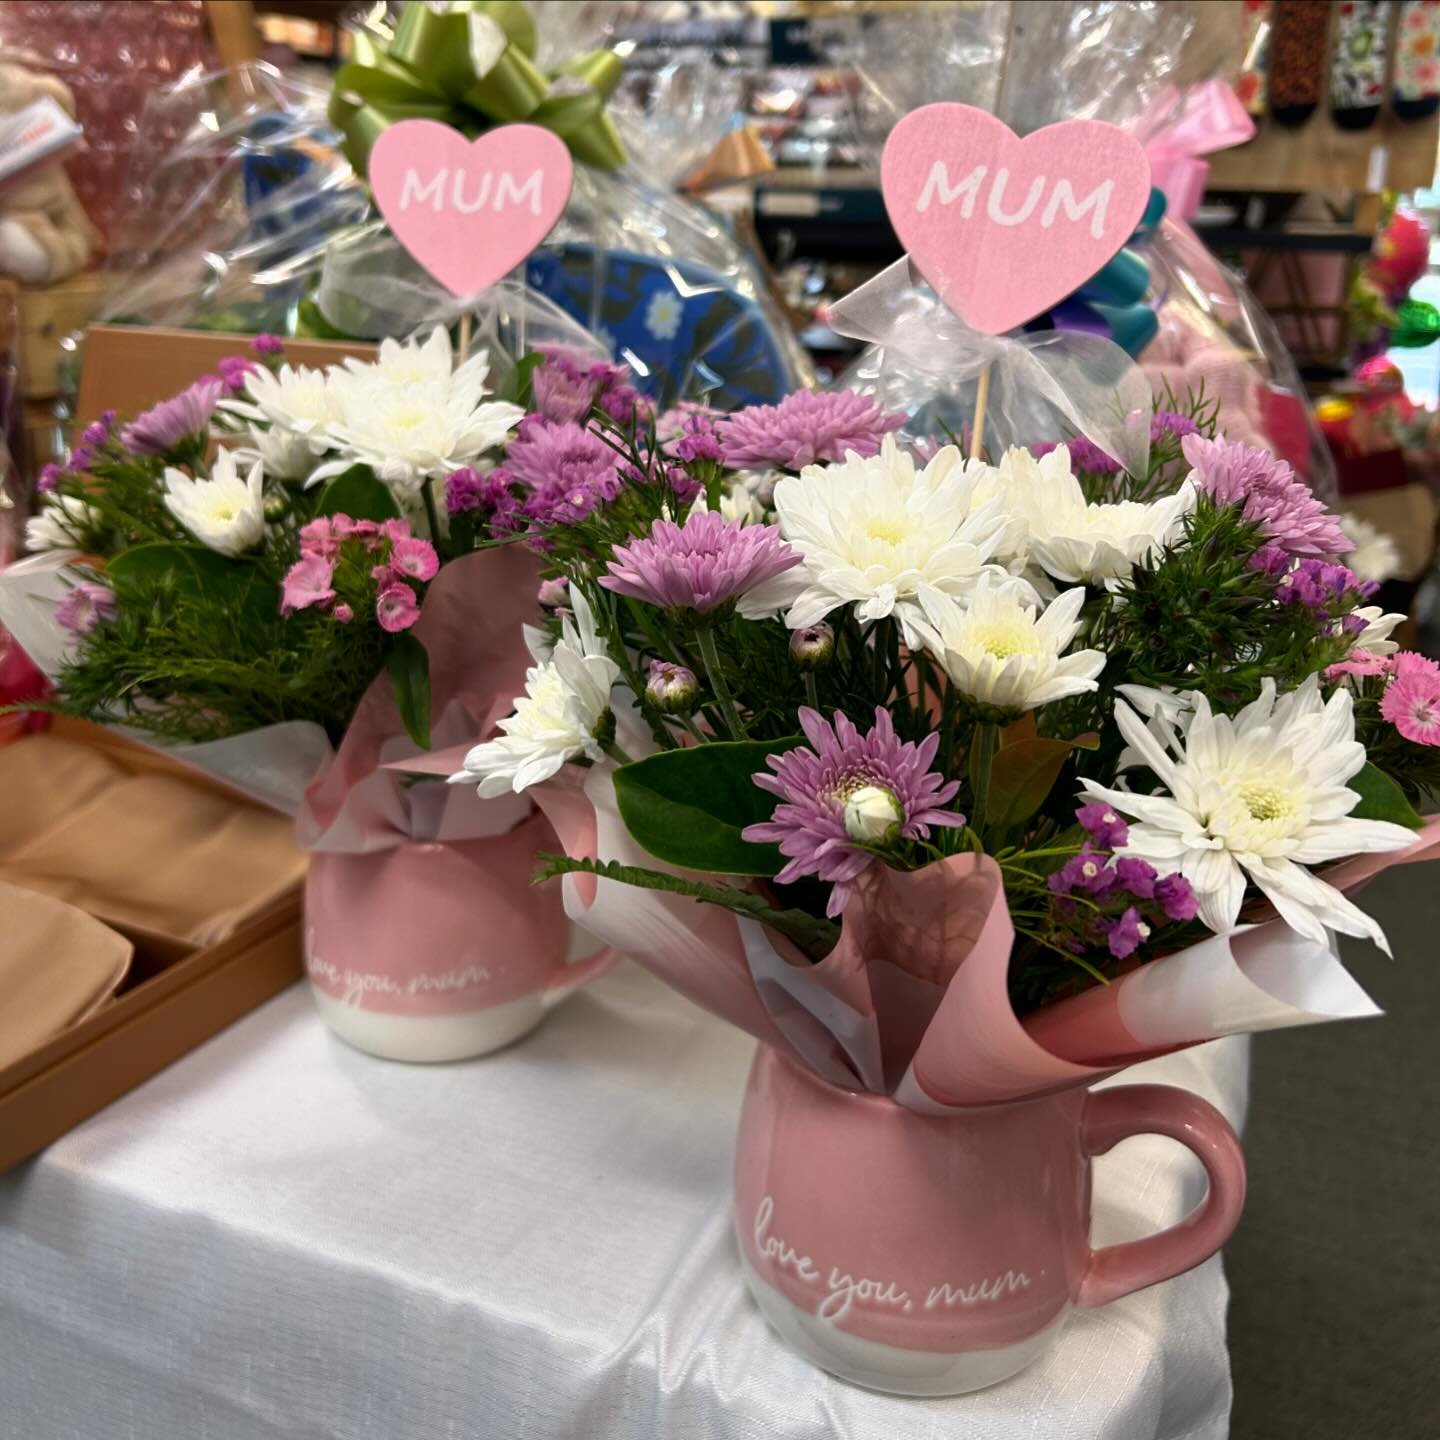 Happy Saturday Flower Lovers 🌸

We have a full shop front of Beautiful Blooms today, while stocks lasts. 

We will be open today 8.30 - 2
&amp; Sunday 8-12 for you to collect your Blooms and Gifts in store. 
Pre order your flowers to avoid missing o